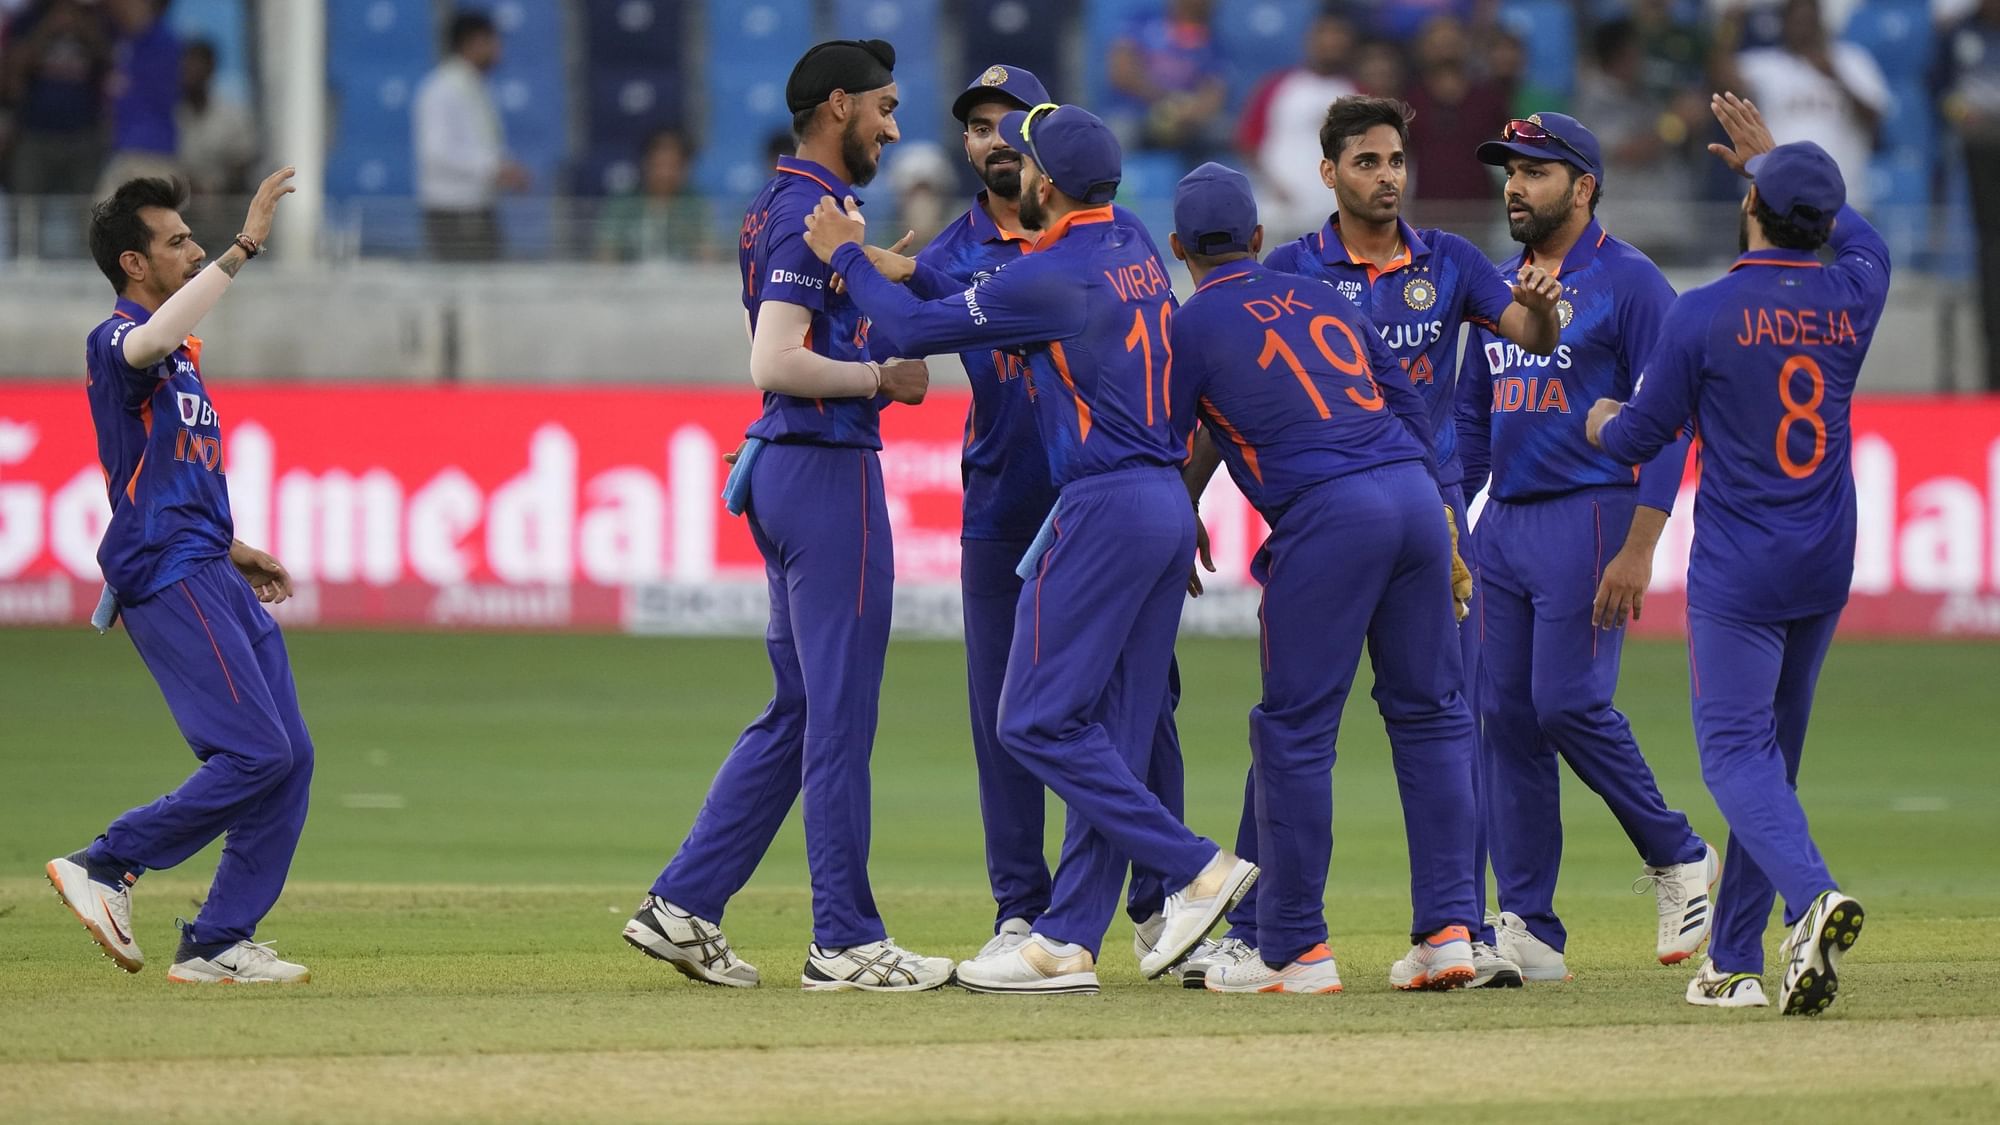 <div class="paragraphs"><p>Bhuvneshwar Kumar was in excellent form  against Pakistan in the Asia Cup 2022 match in Dubai on Sunday.&nbsp;</p></div>